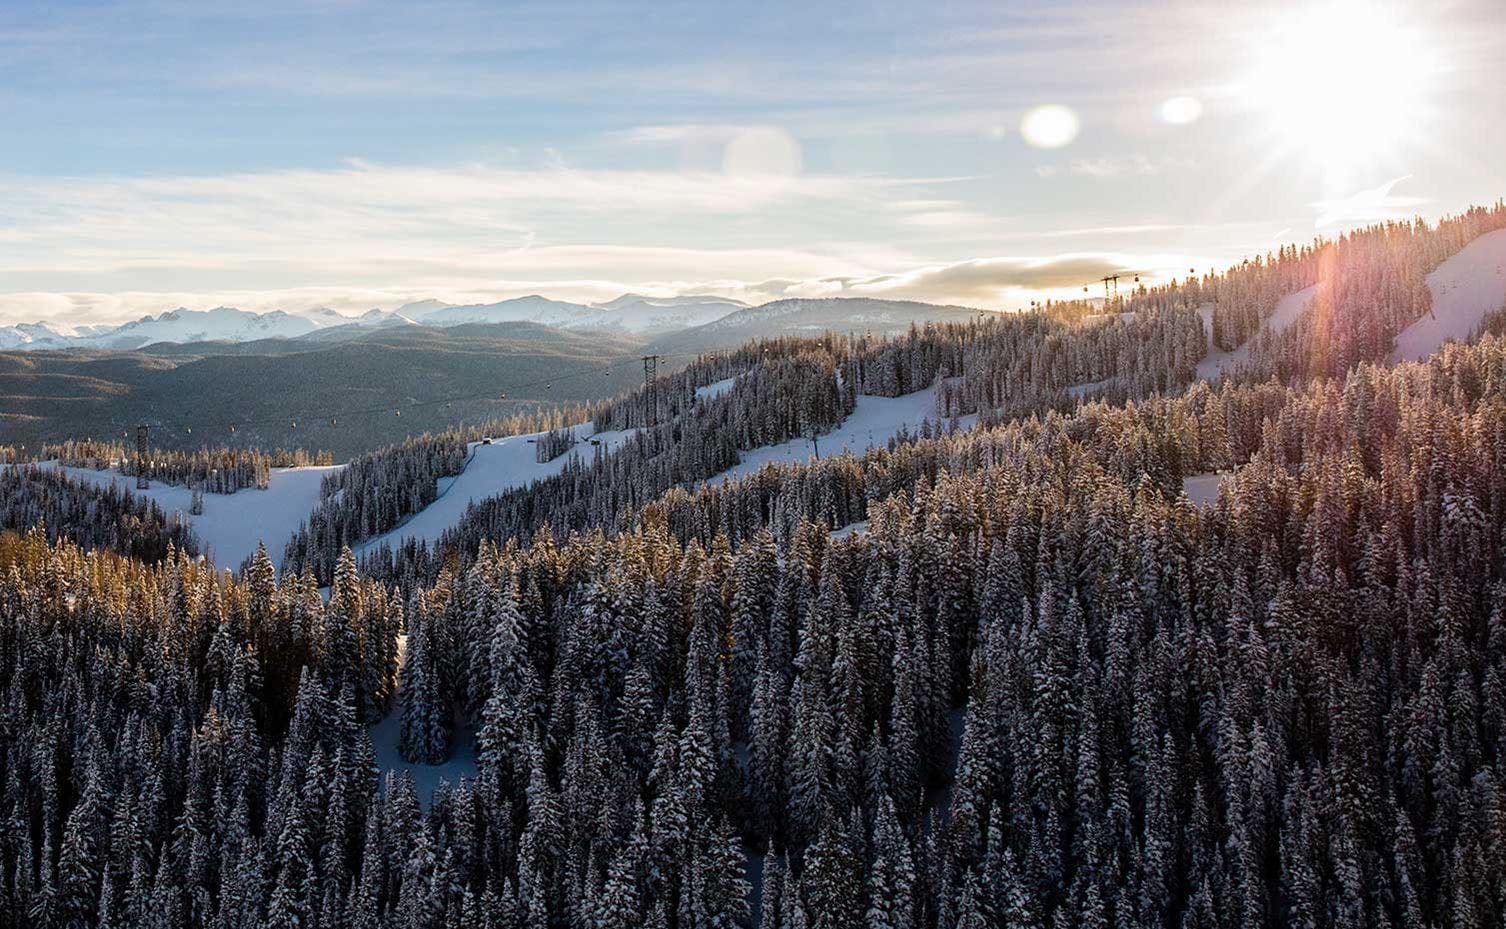 Sunrise over Aspen Mountain in the winter with the Silver Queen Gondola rising along the ridge